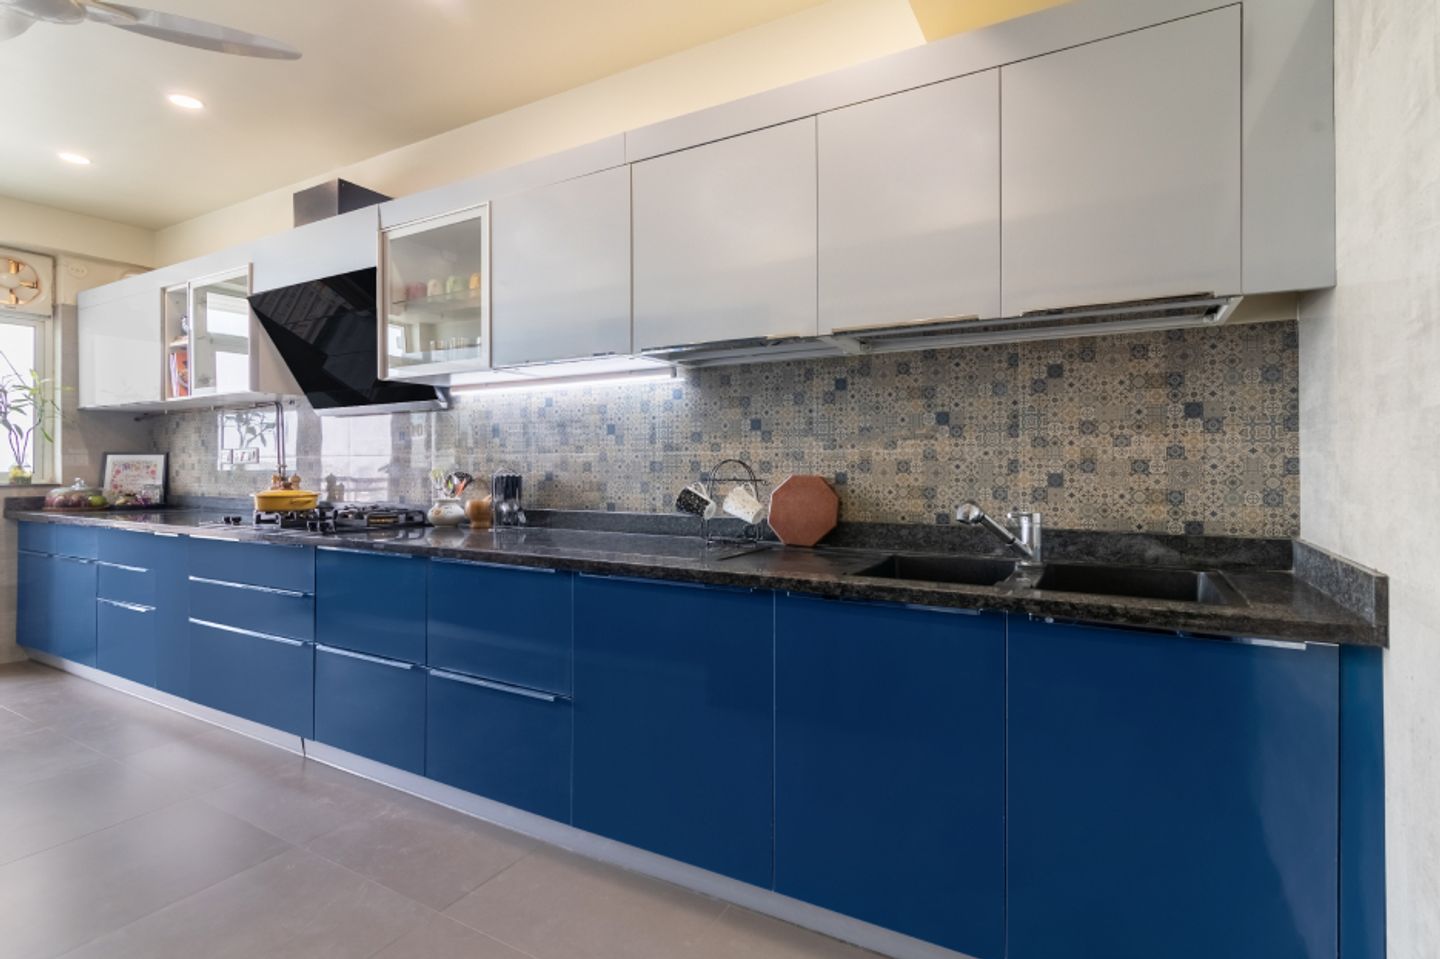 Modern Parallel Kitchen Cabinet Design With A Wide Blue Base Unit With Drawers